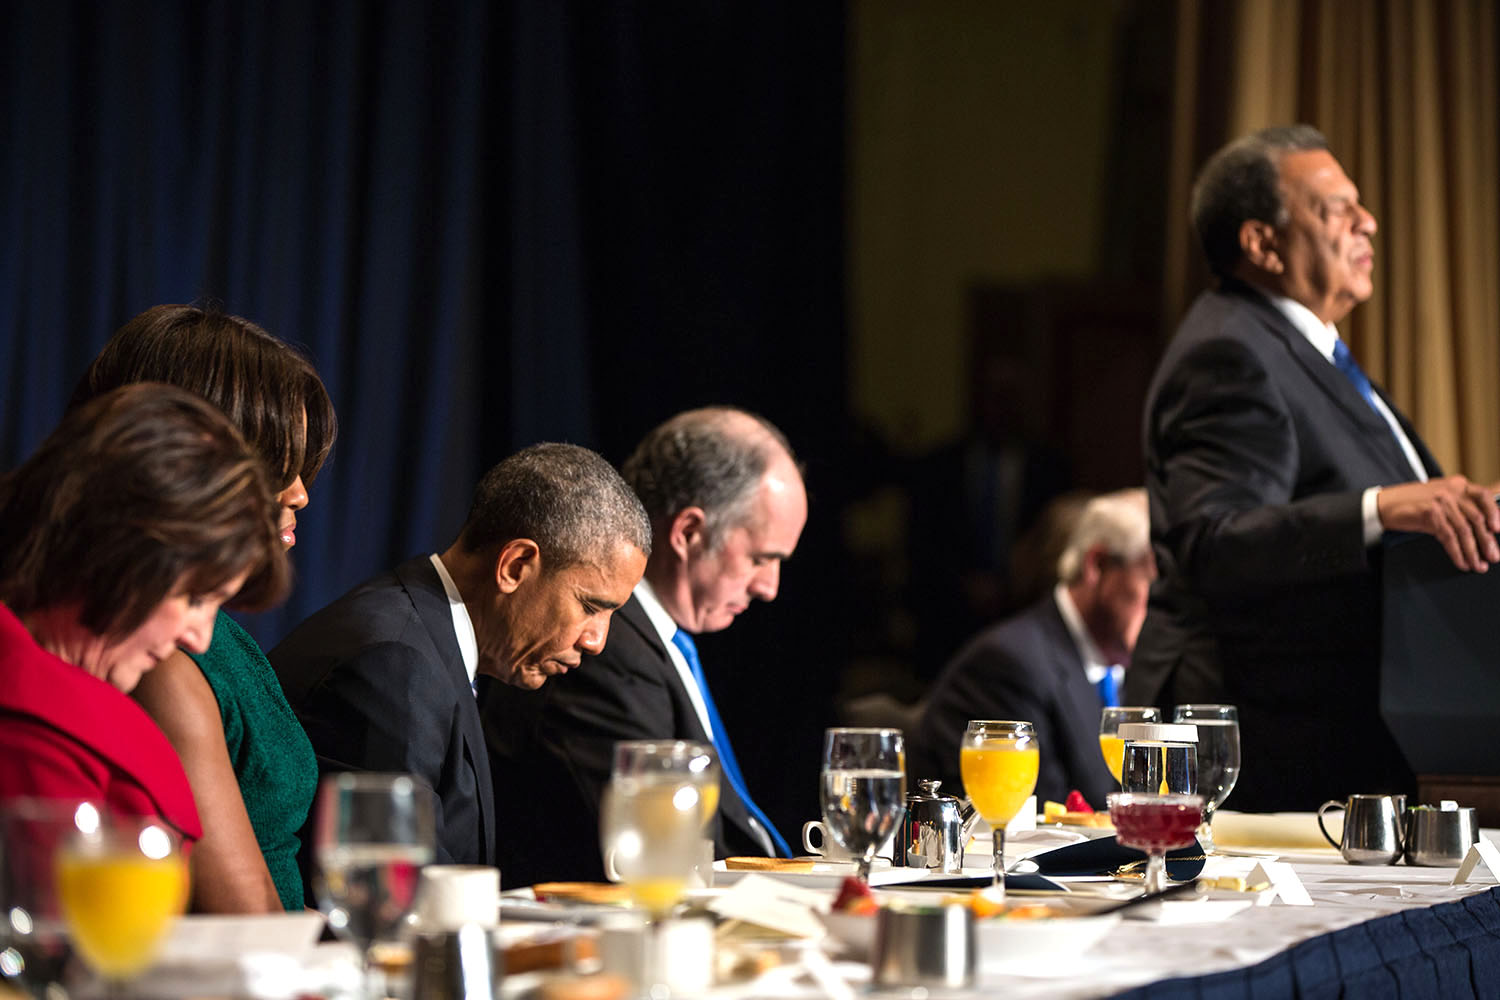 The President and First Lady Michelle Obama join former Atlanta Mayor Andrew Young in the closing prayer during the National Prayer Breakfast